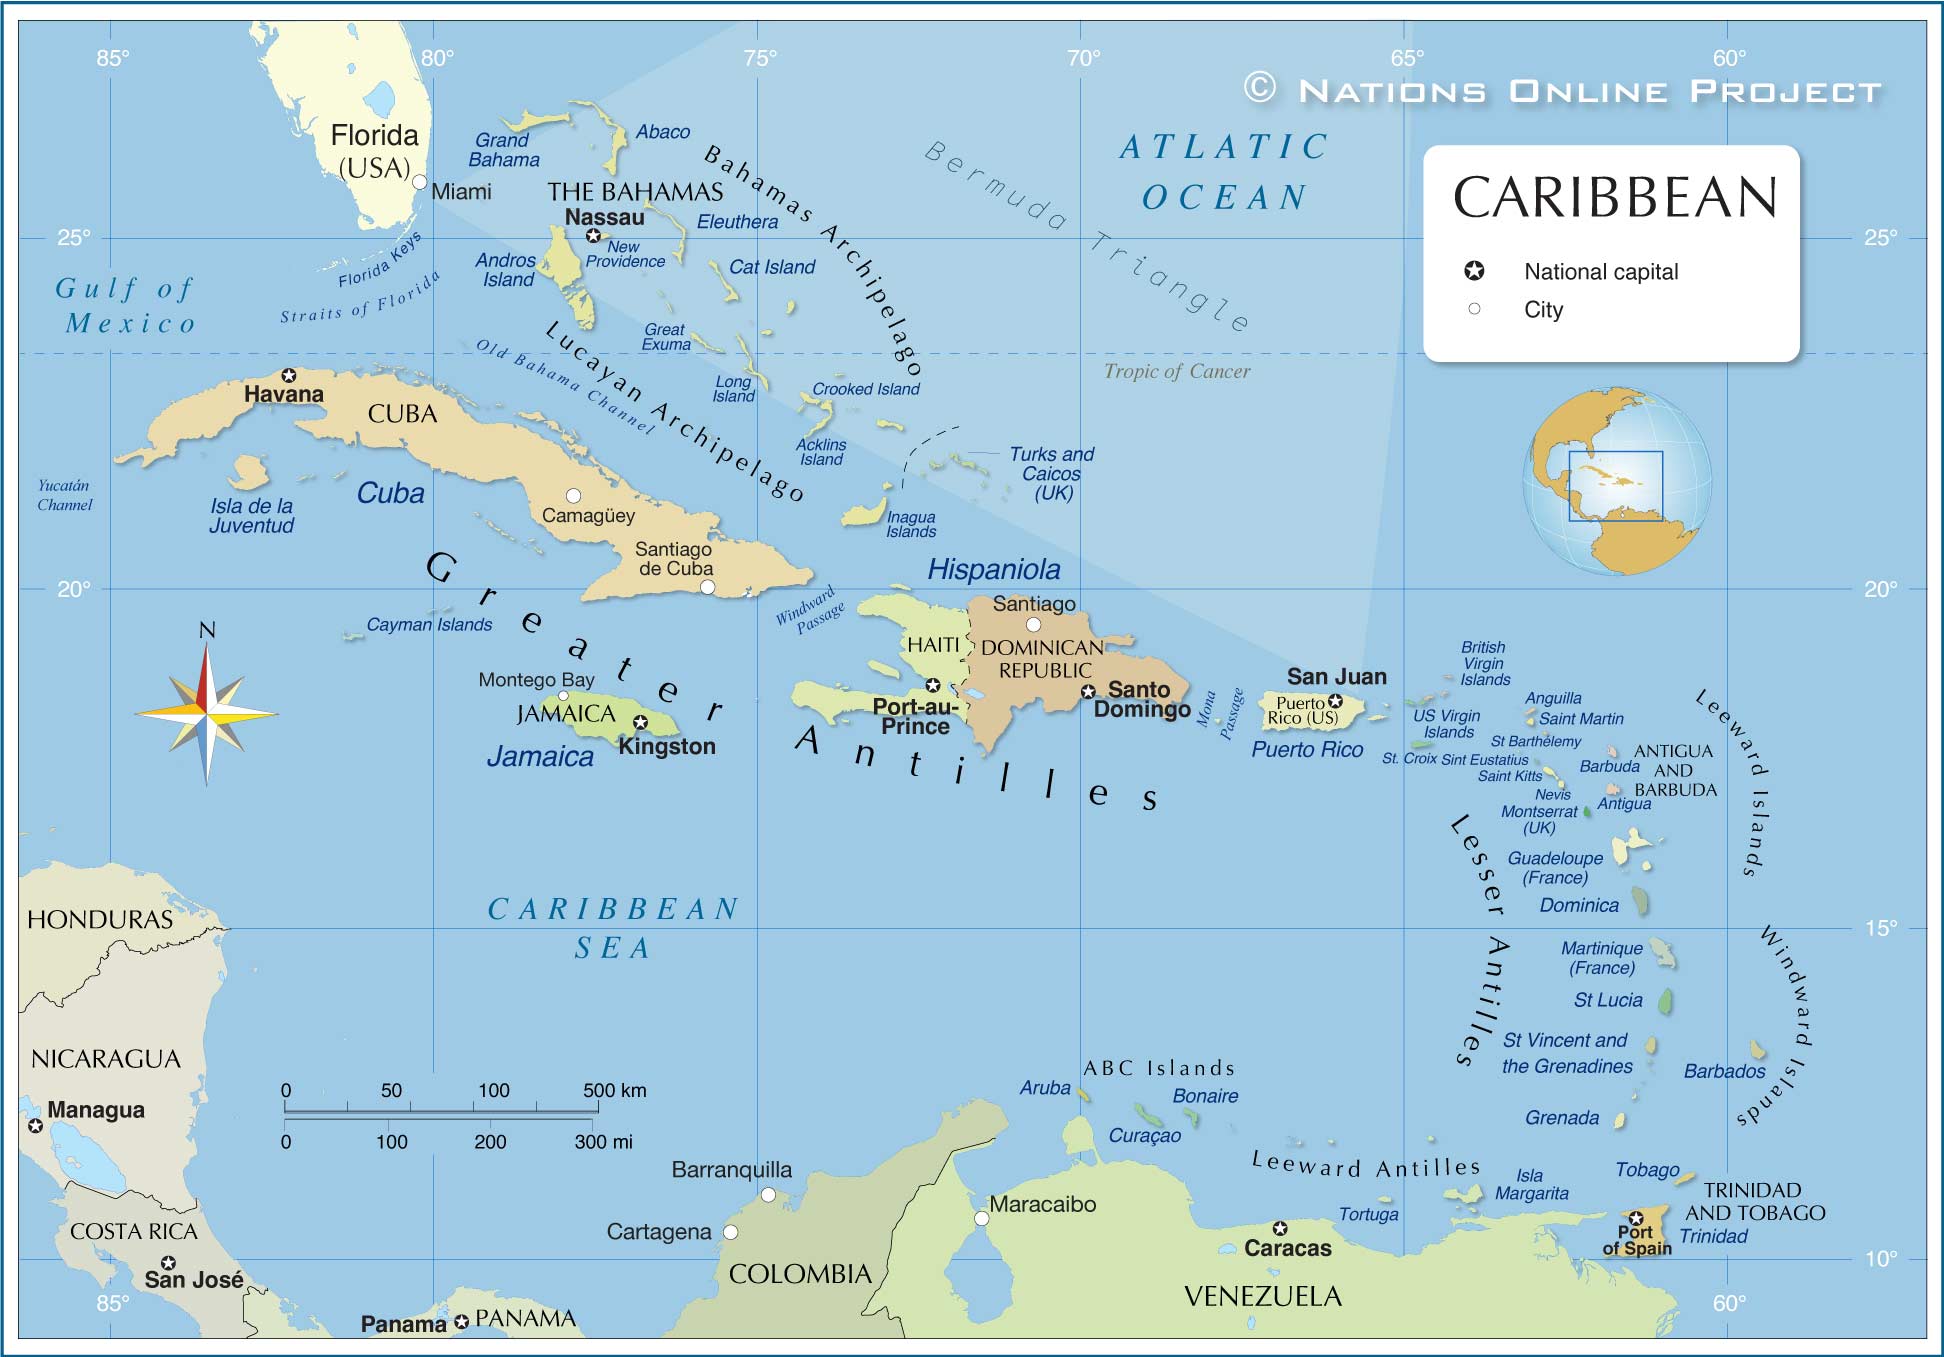 Political Map of the Caribbean - Nations Online Project